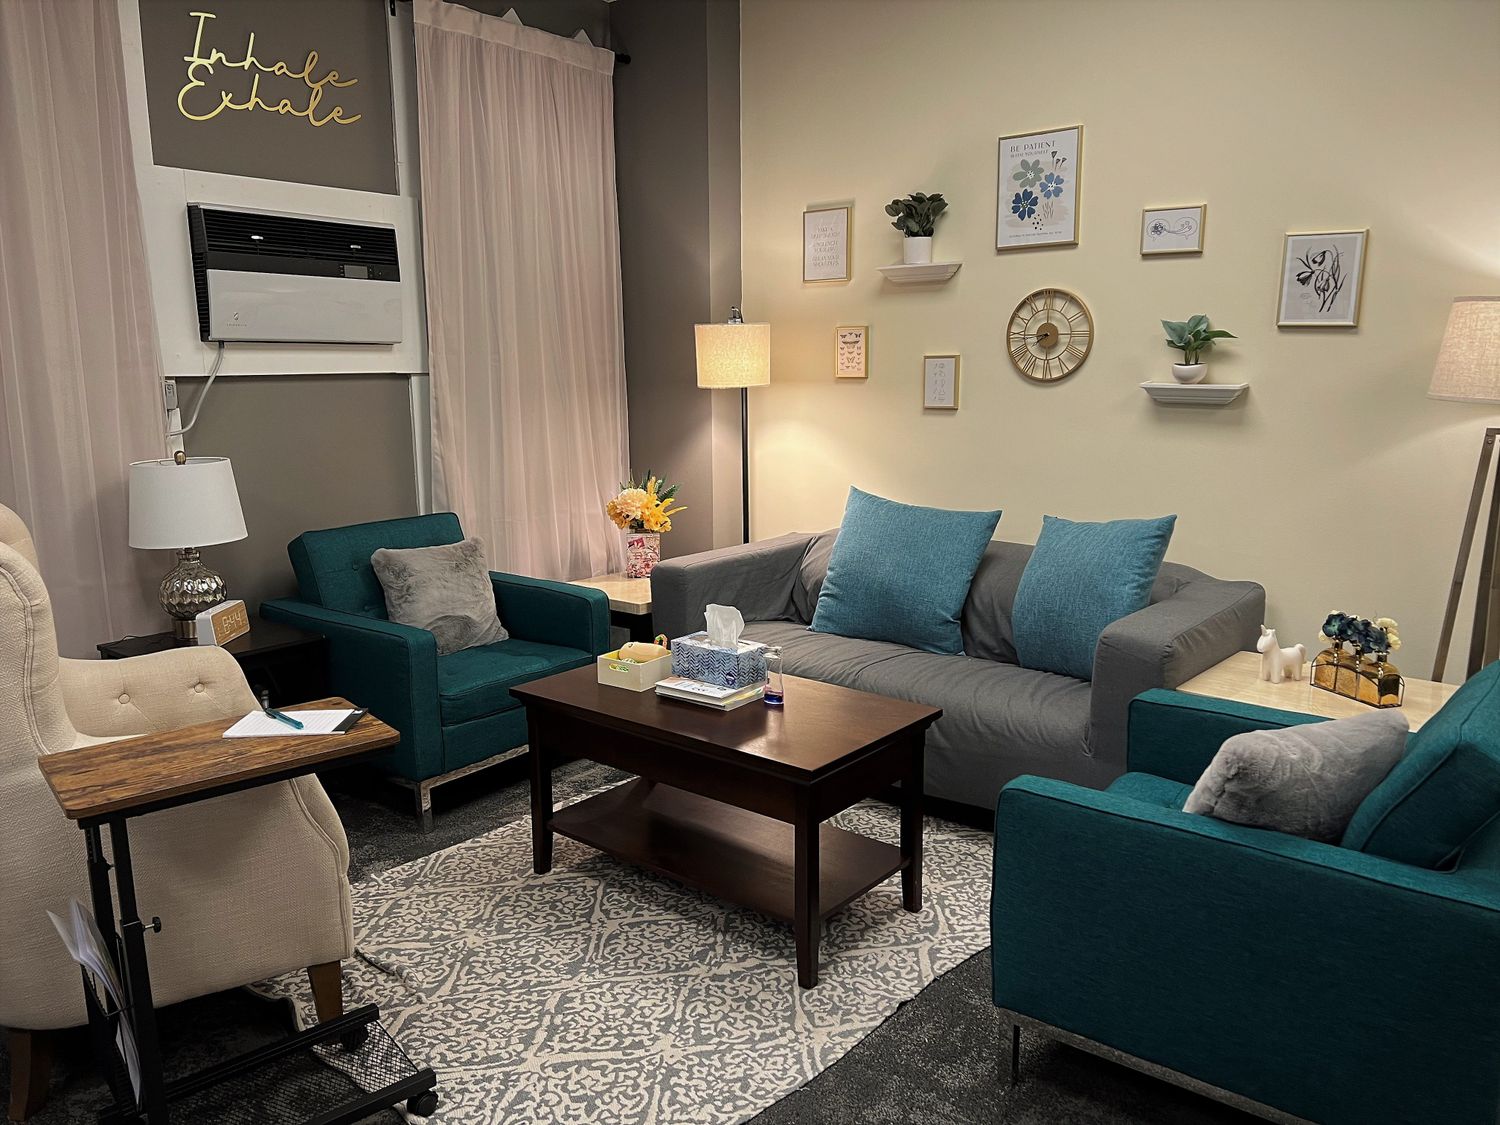 Gallery Photo of Main therapy space with loveseat and 2 arm chairs. 